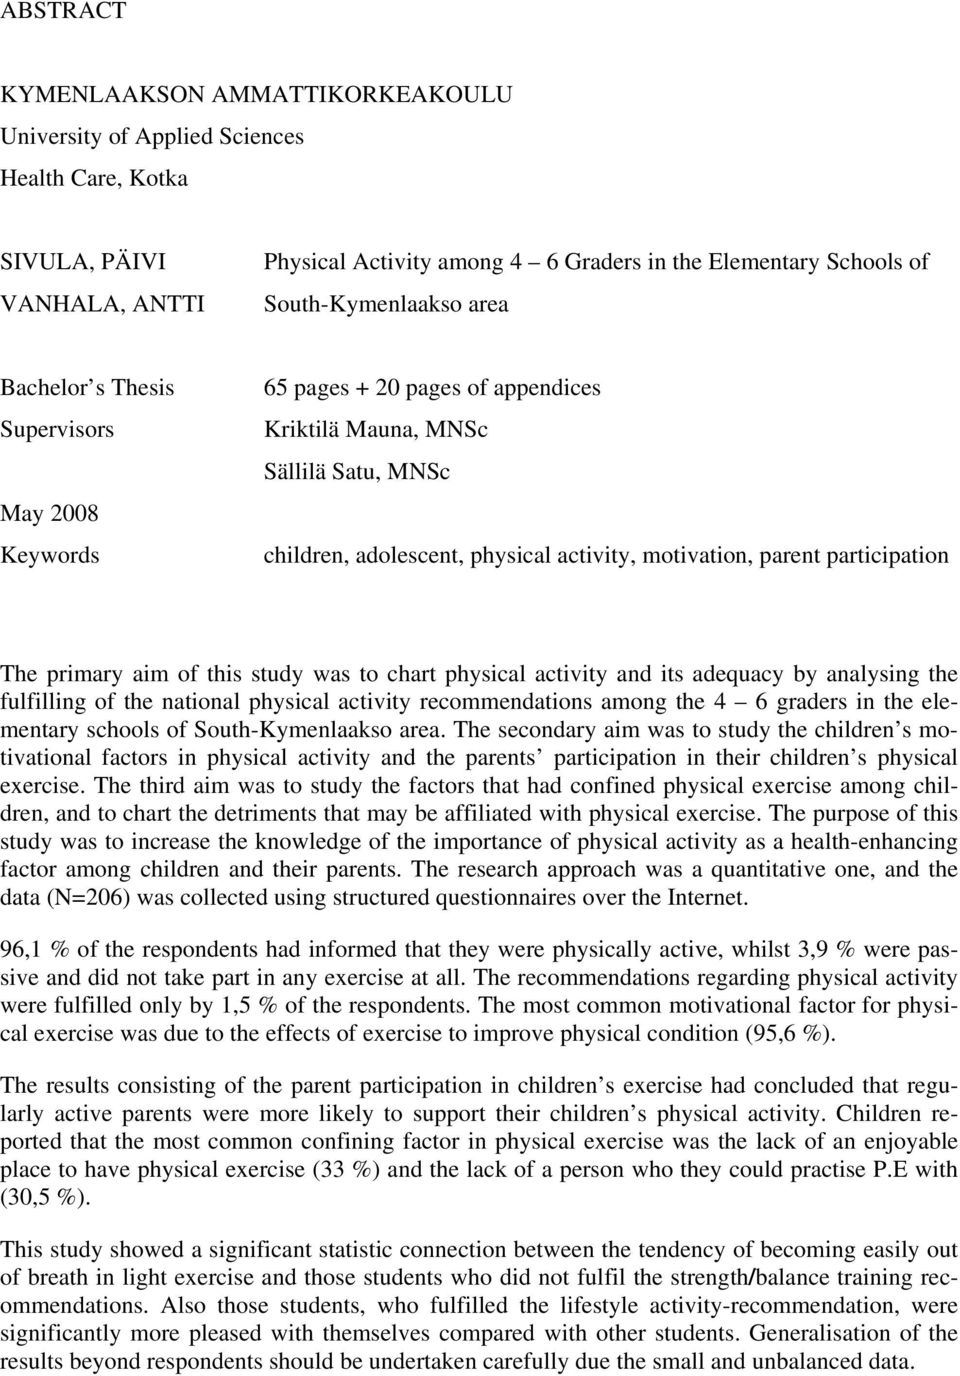 parent participation The primary aim of this study was to chart physical activity and its adequacy by analysing the fulfilling of the national physical activity recommendations among the 4 6 graders